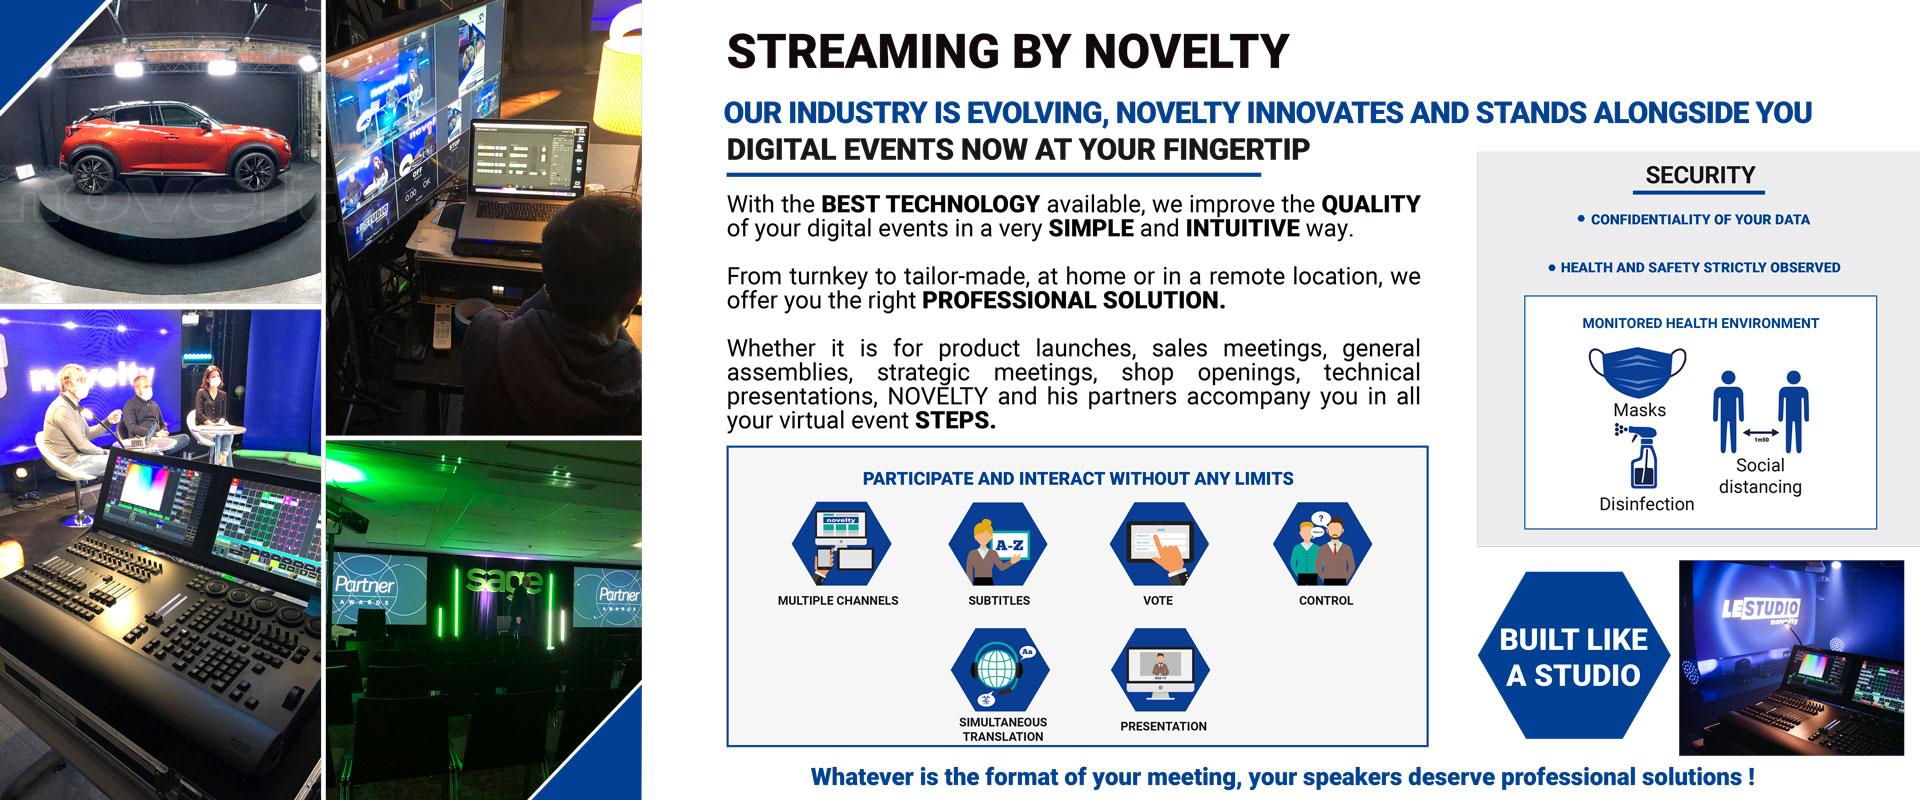 Visuel  Streaming by Novelty - Digital events now at your fingertip